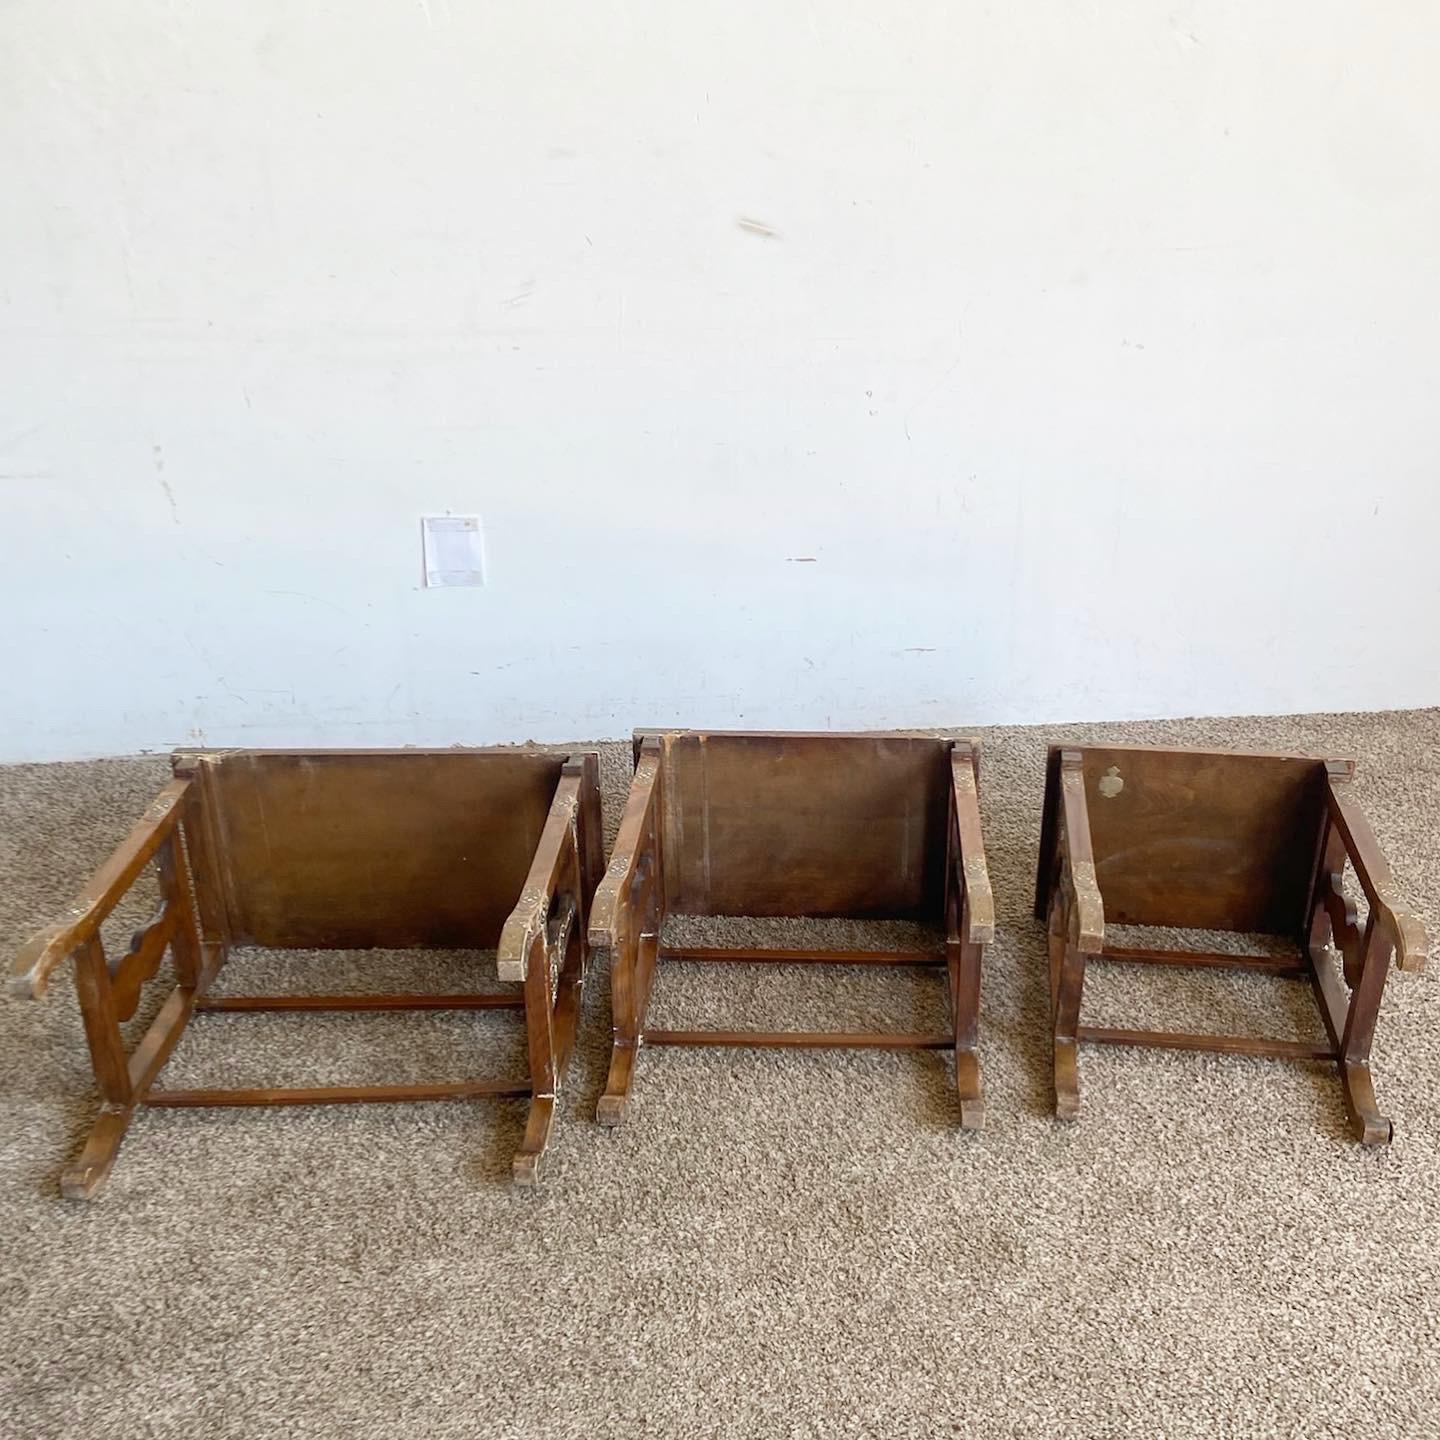 Japanese Wooden Nesting Tables With Brass Accents - Set of 3 For Sale 1